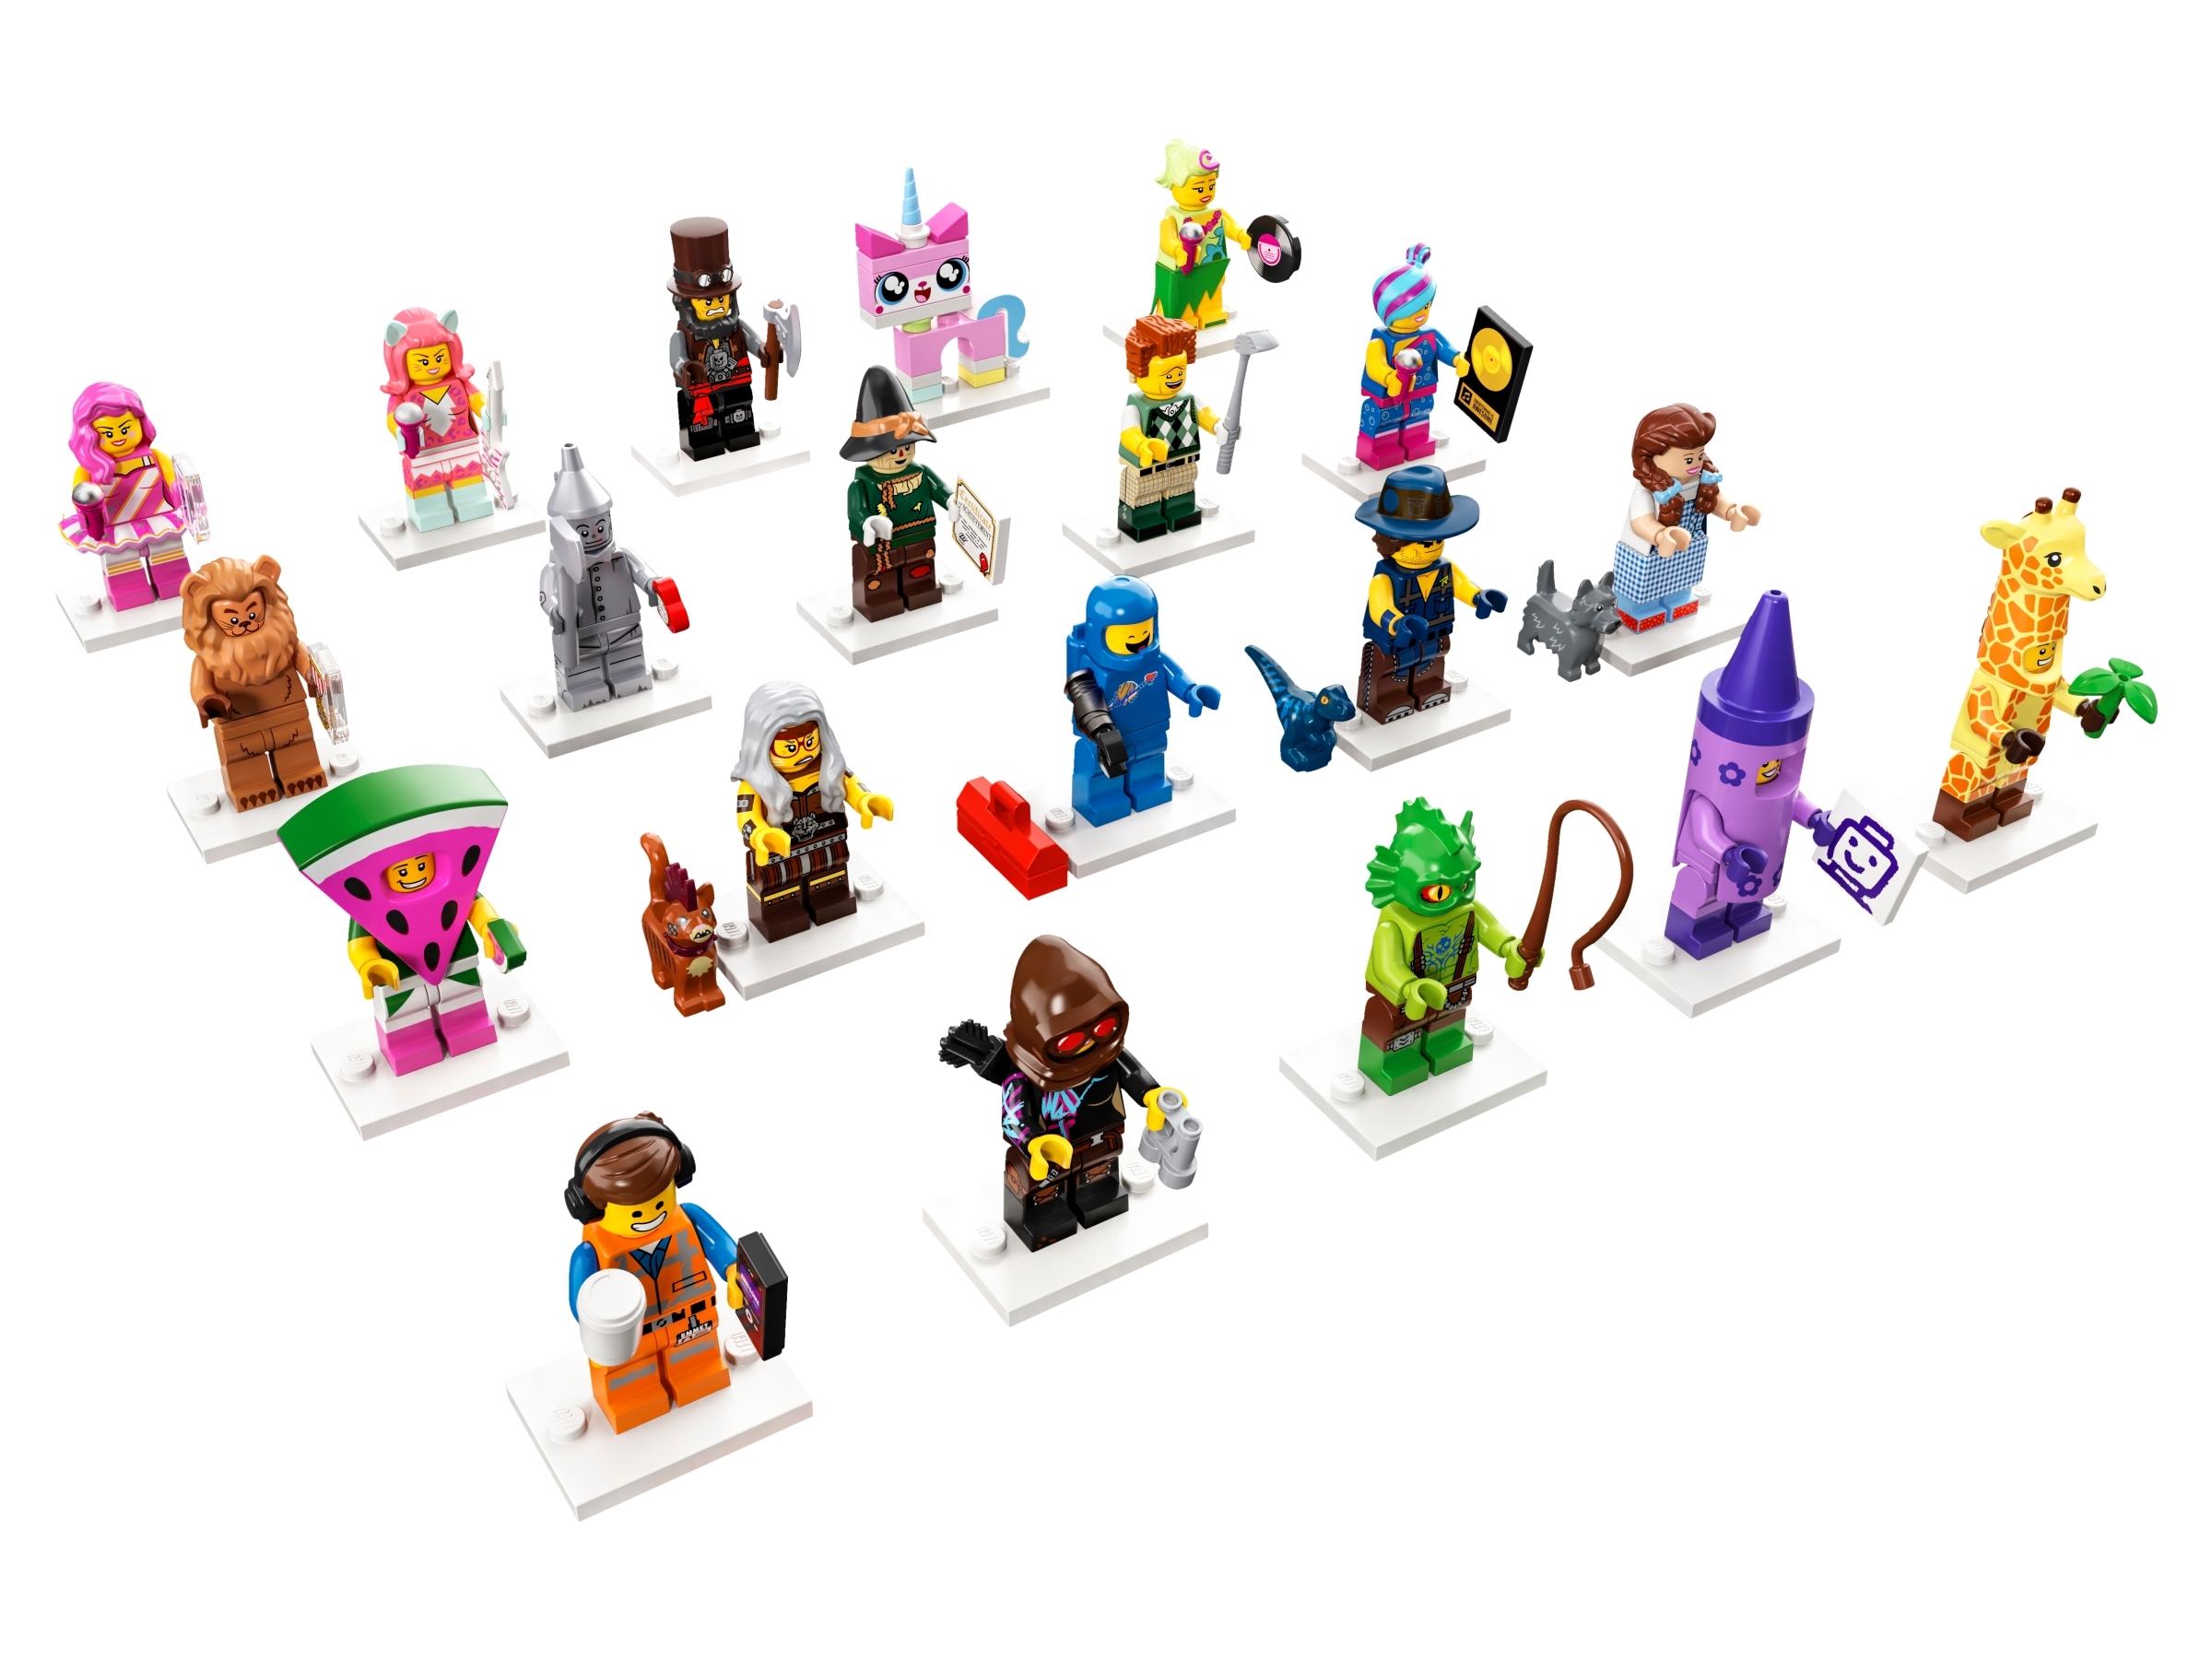 71023 The Lego Movie 2 Collectable Minifigures Series